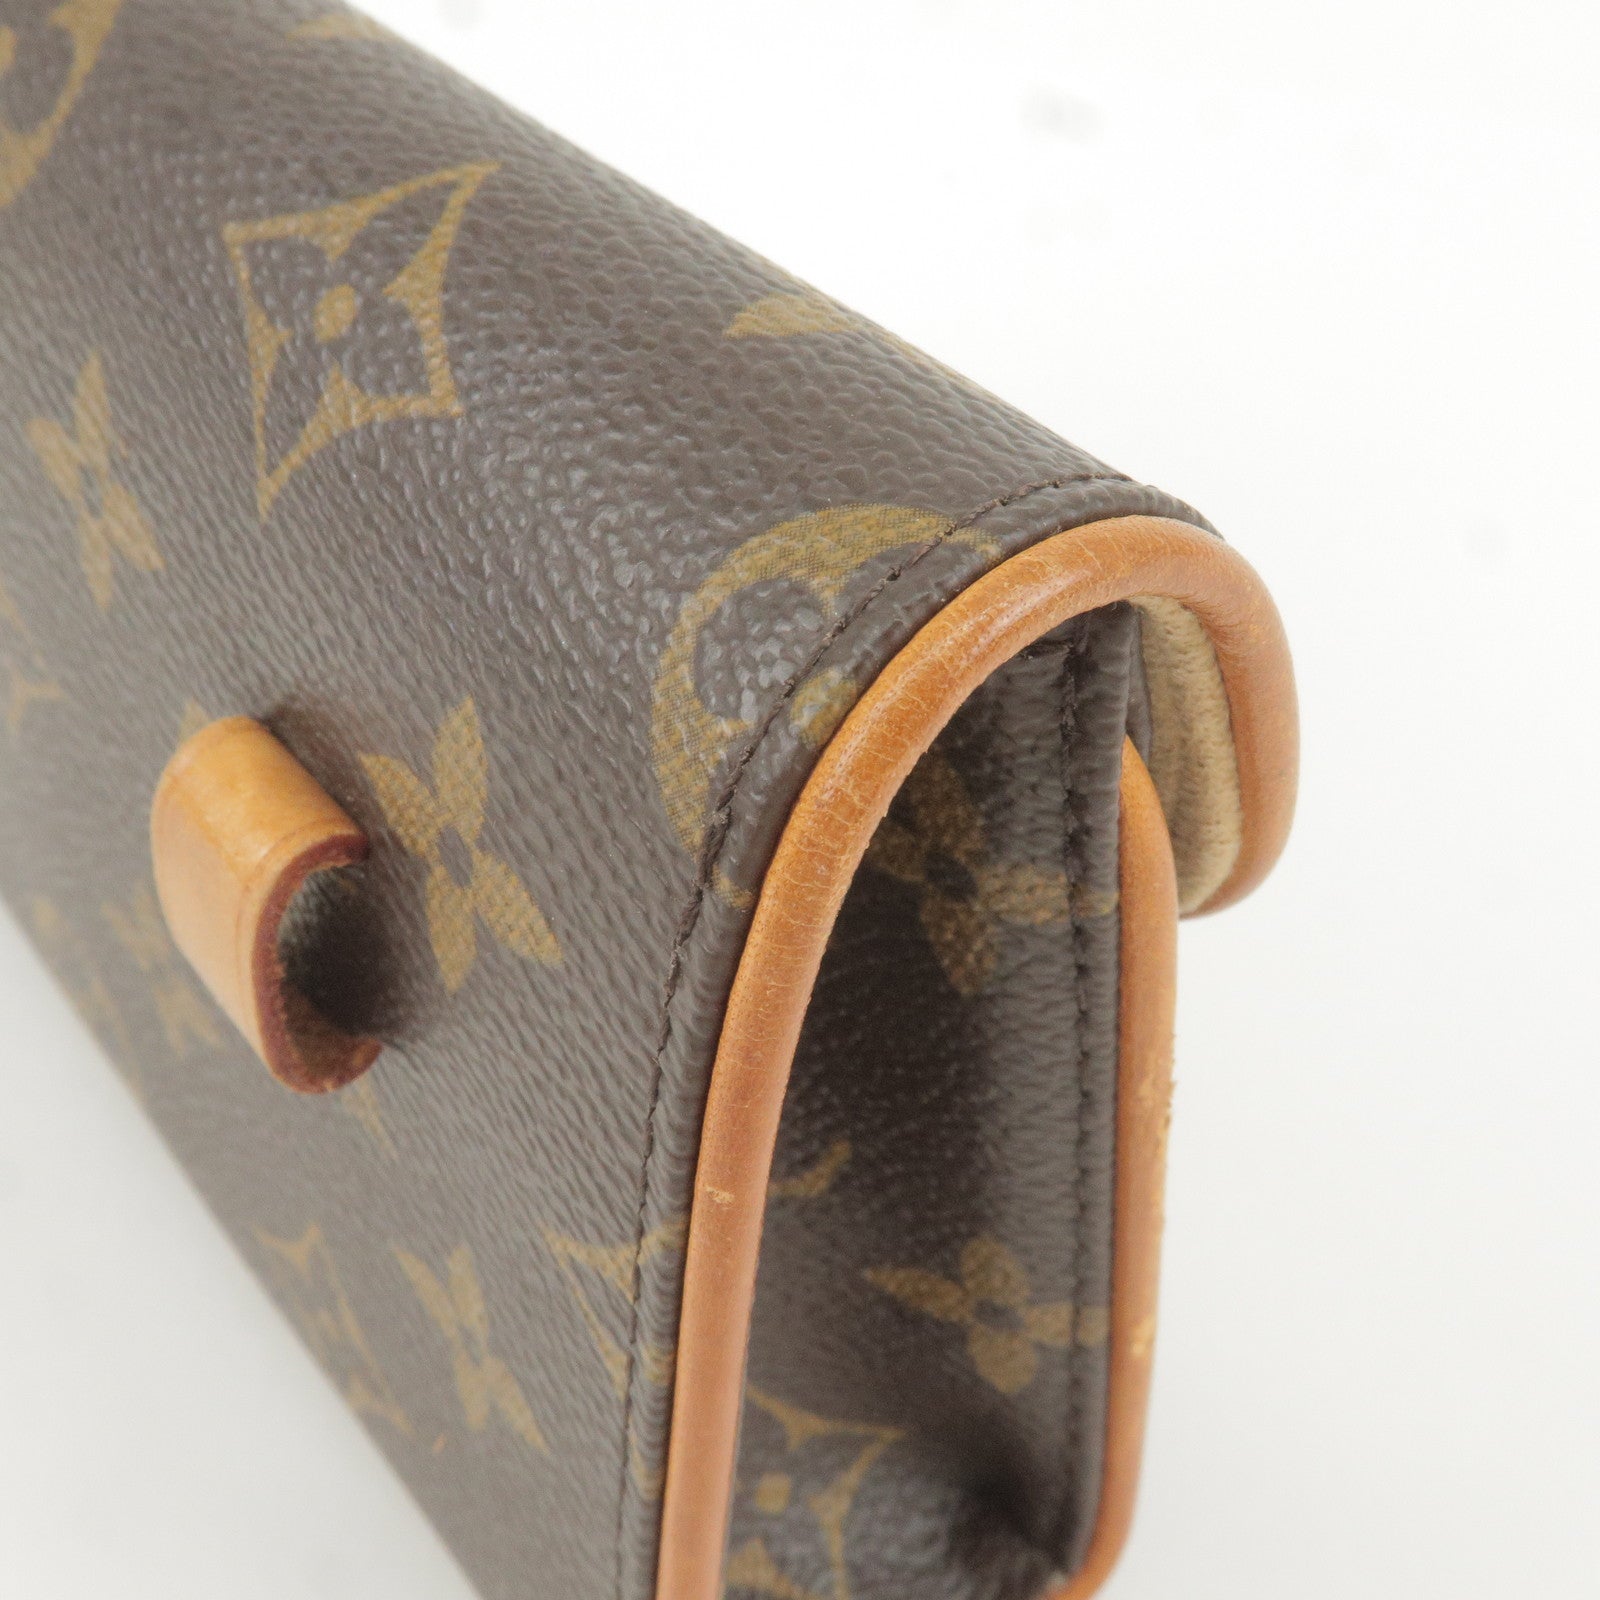 Louis Vuitton - Neverfull MM - Monogram Canvas Ramages - Pre-Loved